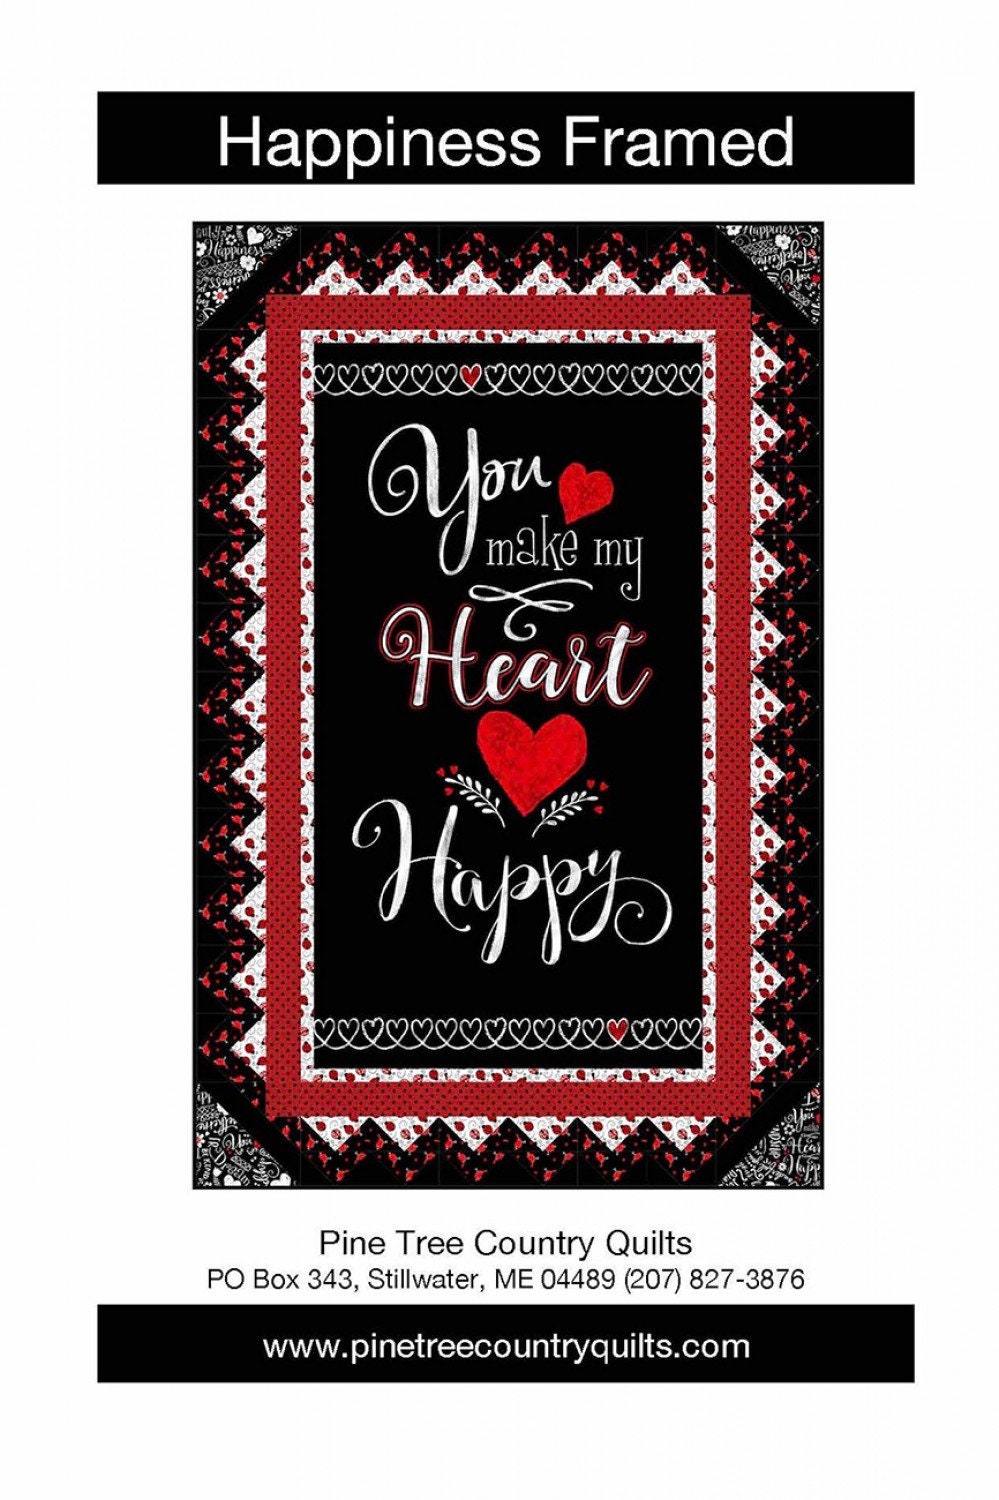 Timeless Treasures Quilt Kit You Make My Heart Happy QUILT KIT by Pinetree County, Timeless Treasures Cotton Fabric, Ladybug Quilt Kit, Ladybugs & Red Birds Quilt